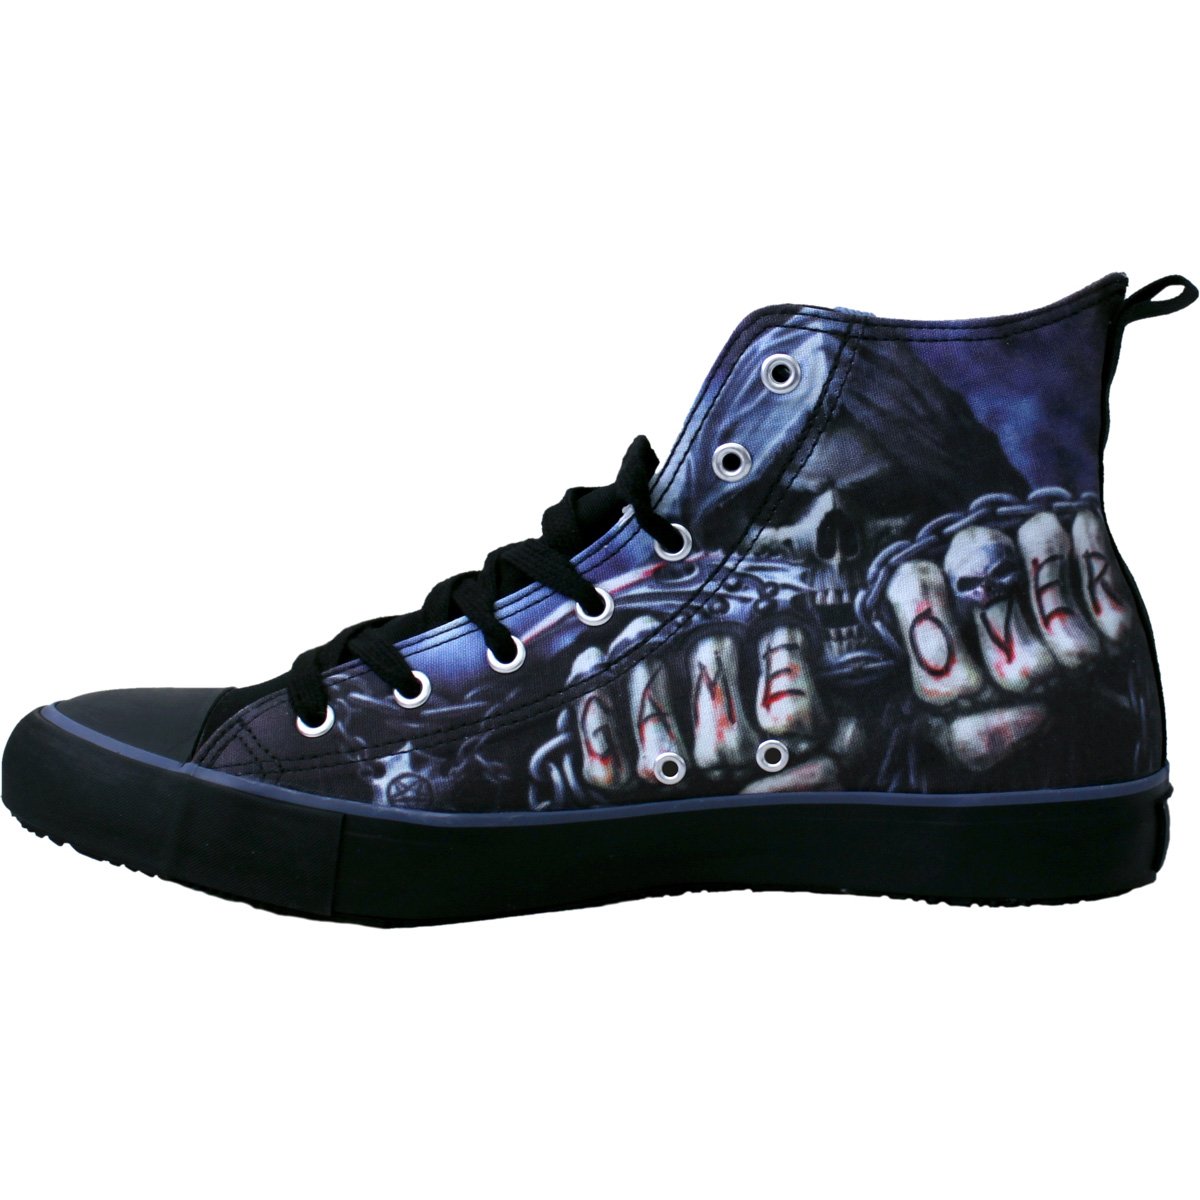 GAME OVER - Sneakers - Men's High Top Laceup - Spiral USA